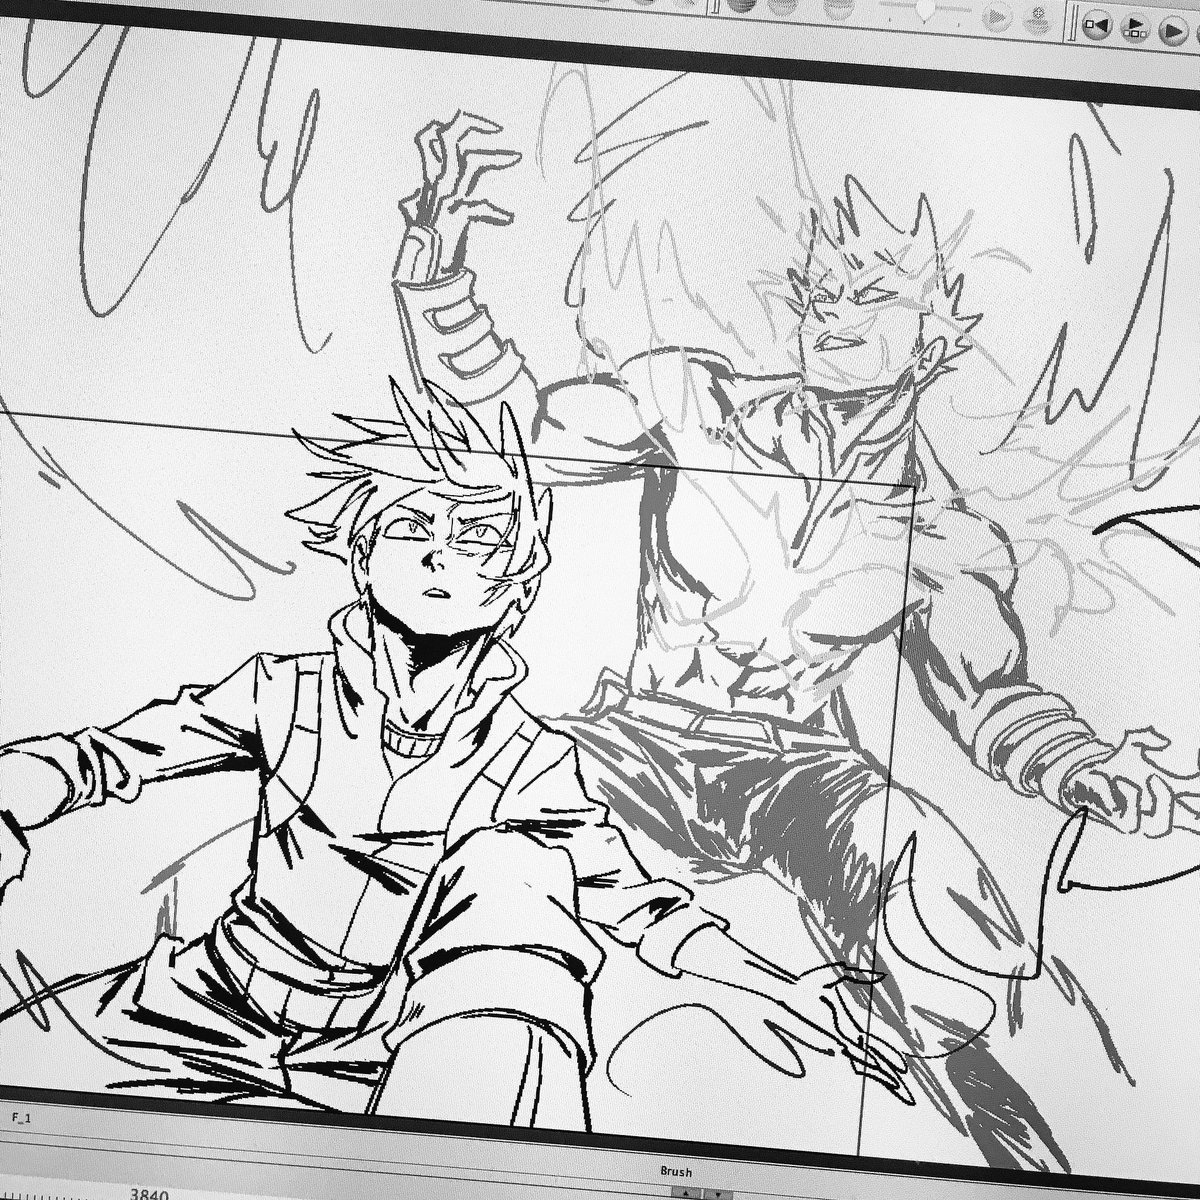 Happy birthday Endeavor! ??
This is one of the million bnha wips I have, doodled way before the redemption arc (you can see his old costume). Hope we'll see some father/son pro hero mission one day! ?✨
#bnha #heroaca_a #エンデヴァー生誕祭2018 #轟炎司生誕祭2018 #ヒロアカ 